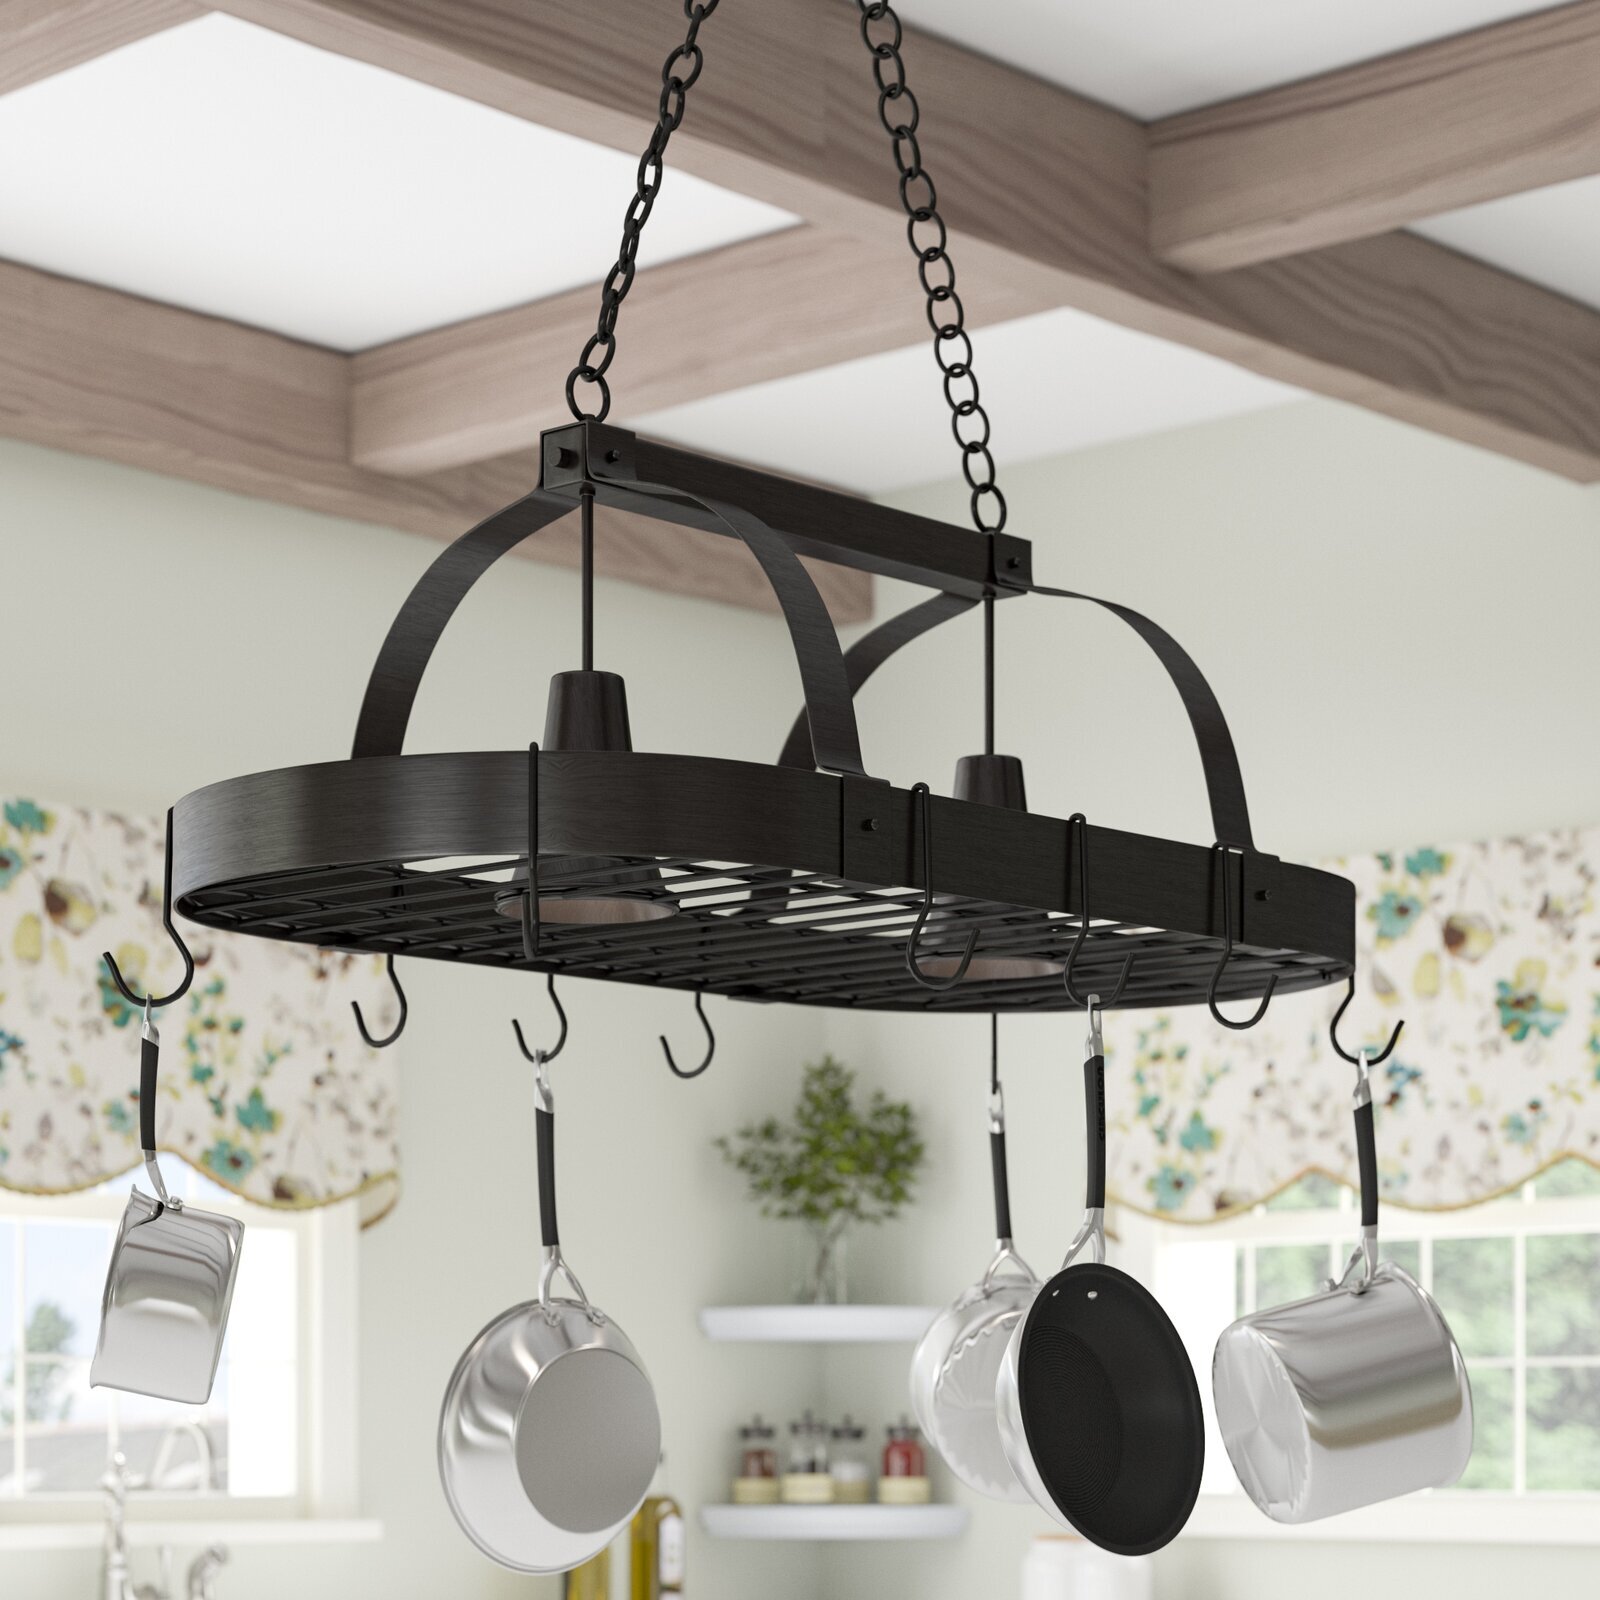 Cast Iron Hanging Rack with Built In Lighting